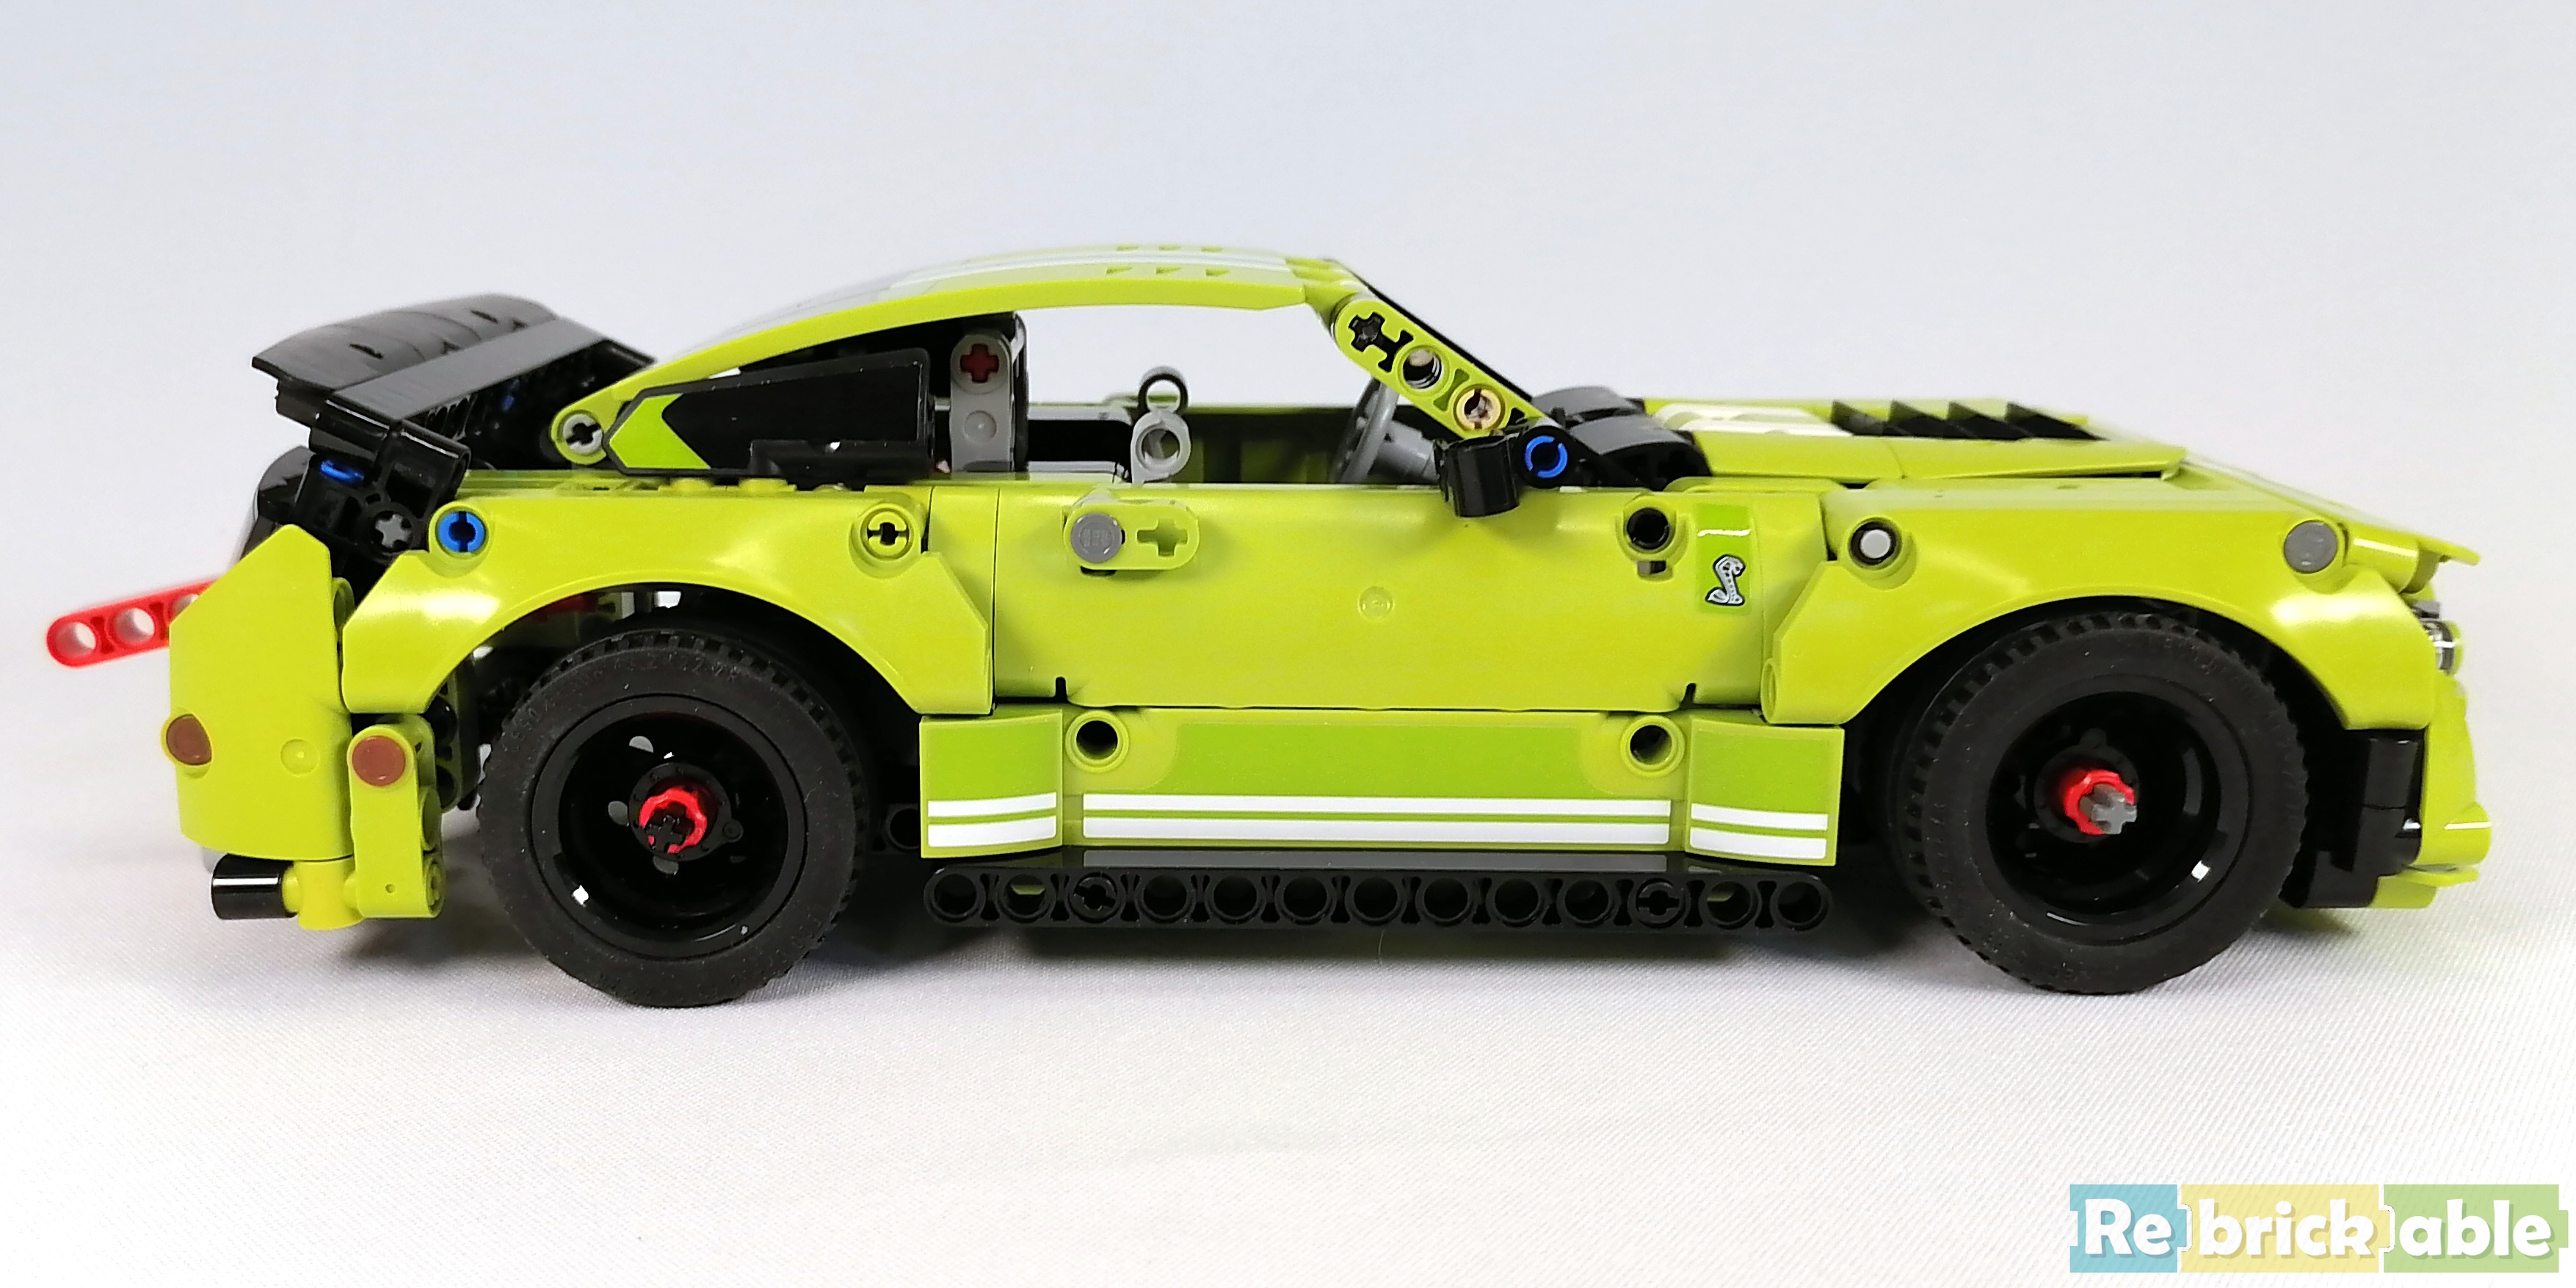 LEGO Technic 42138 Ford Mustang Shelby GT500 detailed building review 